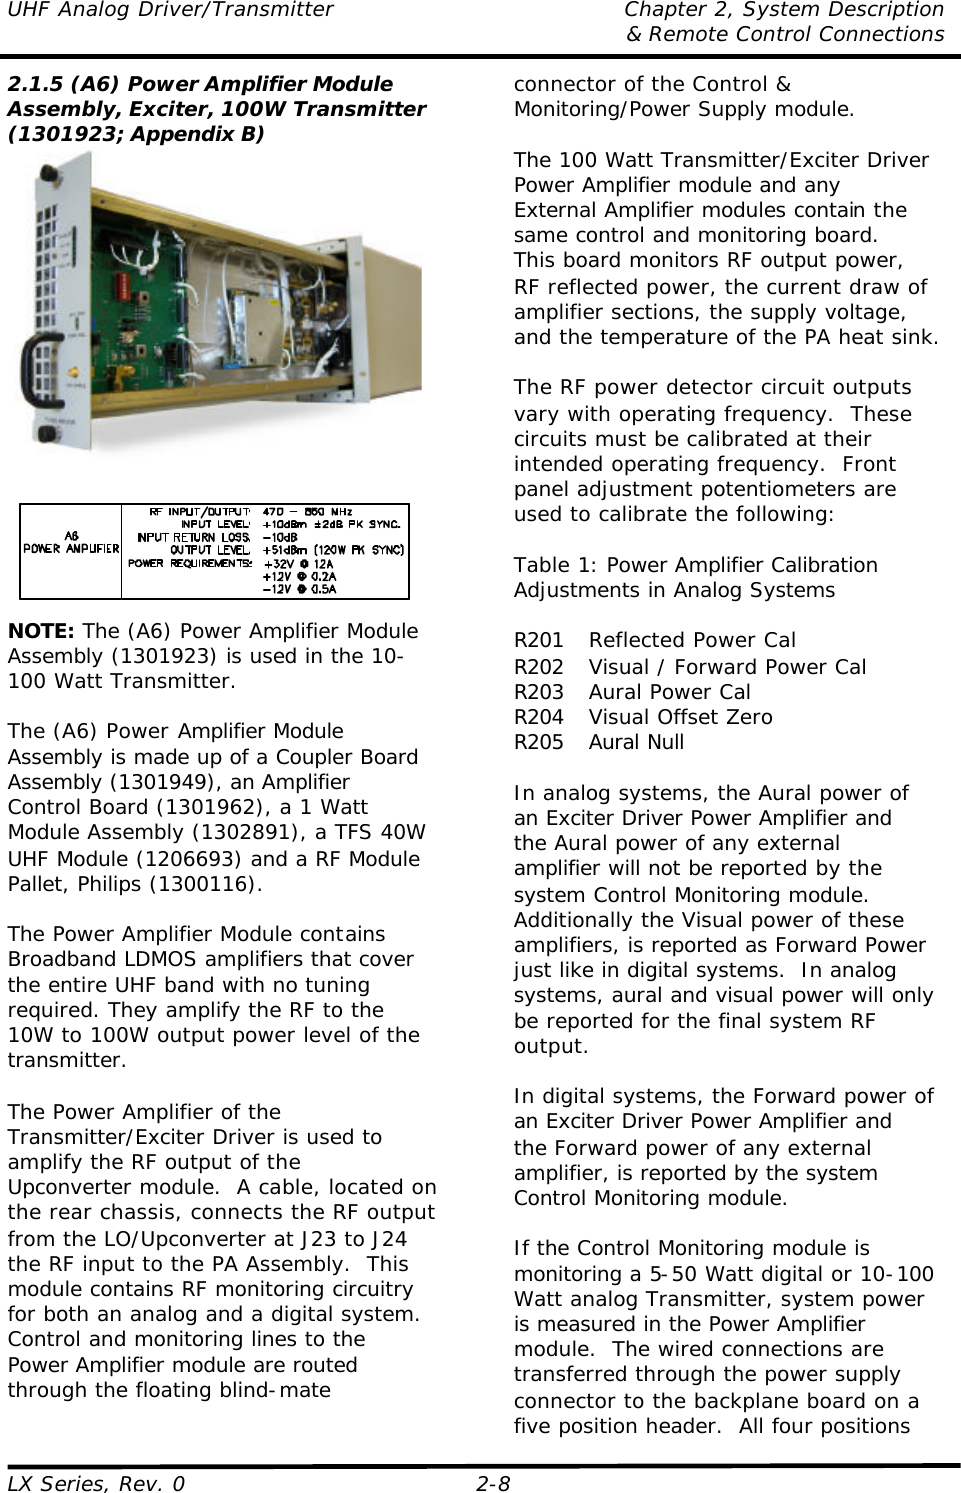 UHF Analog Driver/Transmitter Chapter 2, System Description  &amp; Remote Control Connections LX Series, Rev. 0 2-8 2.1.5 (A6) Power Amplifier Module Assembly, Exciter, 100W Transmitter (1301923; Appendix B)   NOTE: The (A6) Power Amplifier Module Assembly (1301923) is used in the 10-100 Watt Transmitter.  The (A6) Power Amplifier Module Assembly is made up of a Coupler Board Assembly (1301949), an Amplifier Control Board (1301962), a 1 Watt Module Assembly (1302891), a TFS 40W UHF Module (1206693) and a RF Module Pallet, Philips (1300116).  The Power Amplifier Module contains Broadband LDMOS amplifiers that cover the entire UHF band with no tuning required. They amplify the RF to the 10W to 100W output power level of the transmitter.  The Power Amplifier of the Transmitter/Exciter Driver is used to amplify the RF output of the Upconverter module.  A cable, located on the rear chassis, connects the RF output from the LO/Upconverter at J23 to J24 the RF input to the PA Assembly.  This module contains RF monitoring circuitry for both an analog and a digital system.  Control and monitoring lines to the Power Amplifier module are routed through the floating blind-mate connector of the Control &amp; Monitoring/Power Supply module.  The 100 Watt Transmitter/Exciter Driver Power Amplifier module and any External Amplifier modules contain the same control and monitoring board.  This board monitors RF output power, RF reflected power, the current draw of amplifier sections, the supply voltage, and the temperature of the PA heat sink.  The RF power detector circuit outputs vary with operating frequency.  These circuits must be calibrated at their intended operating frequency.  Front panel adjustment potentiometers are used to calibrate the following:  Table 1: Power Amplifier Calibration Adjustments in Analog Systems  R201 Reflected Power Cal R202 Visual / Forward Power Cal R203 Aural Power Cal R204 Visual Offset Zero R205 Aural Null  In analog systems, the Aural power of an Exciter Driver Power Amplifier and the Aural power of any external amplifier will not be reported by the system Control Monitoring module.  Additionally the Visual power of these amplifiers, is reported as Forward Power just like in digital systems.  In analog systems, aural and visual power will only be reported for the final system RF output.    In digital systems, the Forward power of an Exciter Driver Power Amplifier and the Forward power of any external amplifier, is reported by the system Control Monitoring module.   If the Control Monitoring module is monitoring a 5-50 Watt digital or 10-100 Watt analog Transmitter, system power is measured in the Power Amplifier module.  The wired connections are transferred through the power supply connector to the backplane board on a five position header.  All four positions 